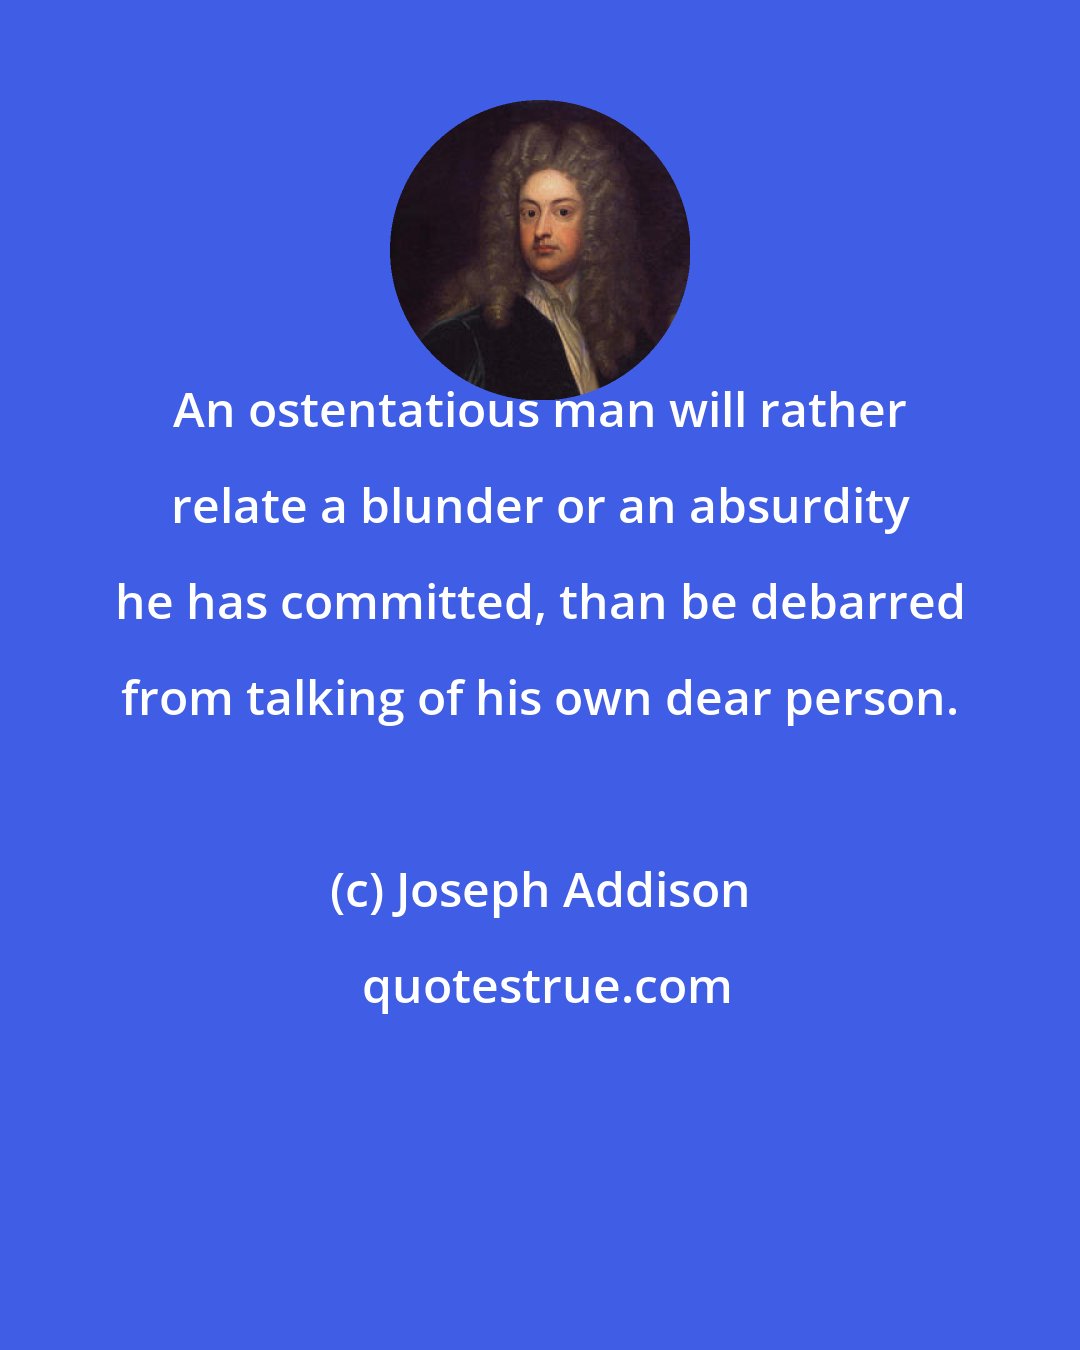 Joseph Addison: An ostentatious man will rather relate a blunder or an absurdity he has committed, than be debarred from talking of his own dear person.